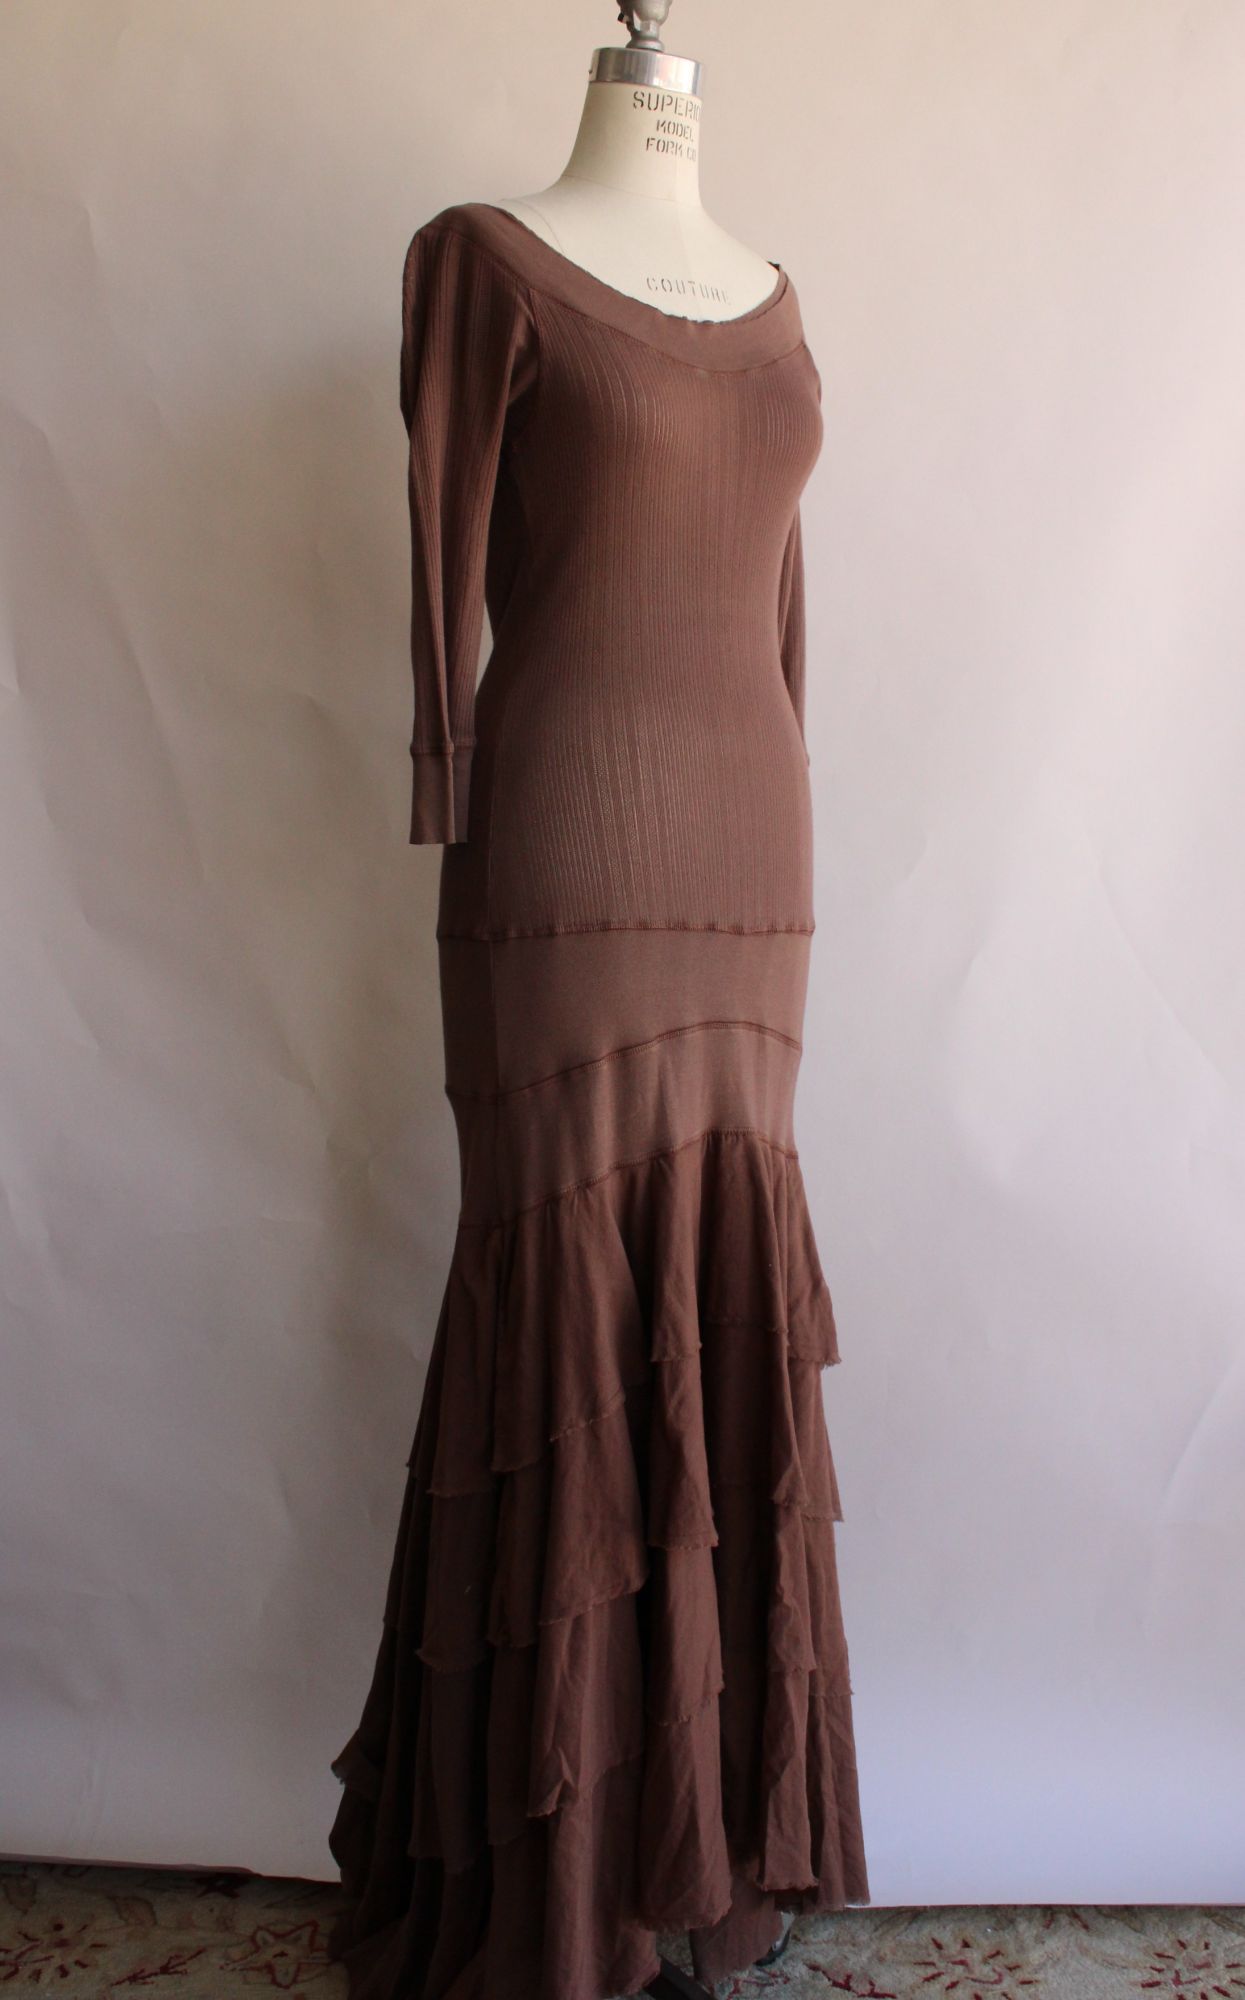 Eco-Ganik womens Dress in brown, Size Small, Full length, multi tiered